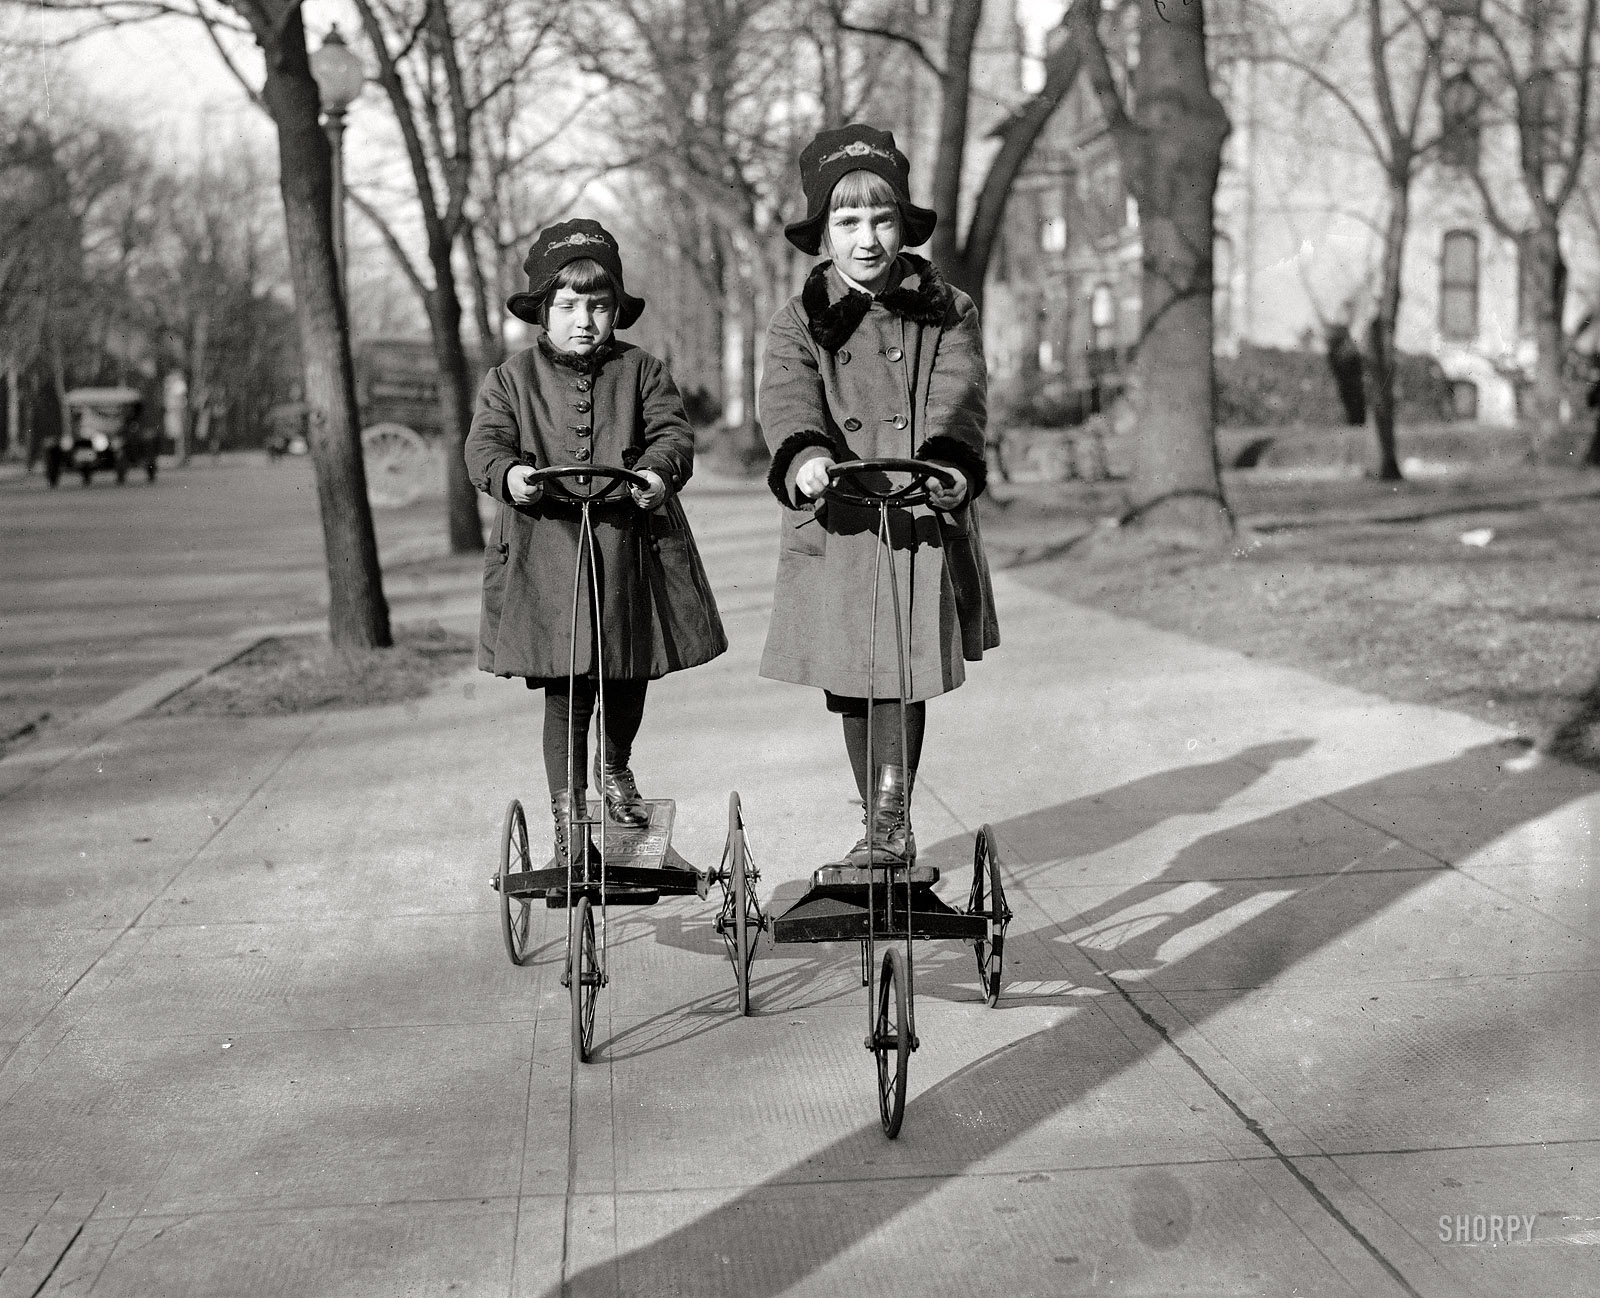 January 13, 1920. Washington, D.C. "Children of Roger Nielsen, Danish Legation; Rita & Ruth." National Photo Company Collection glass negative. View full size.